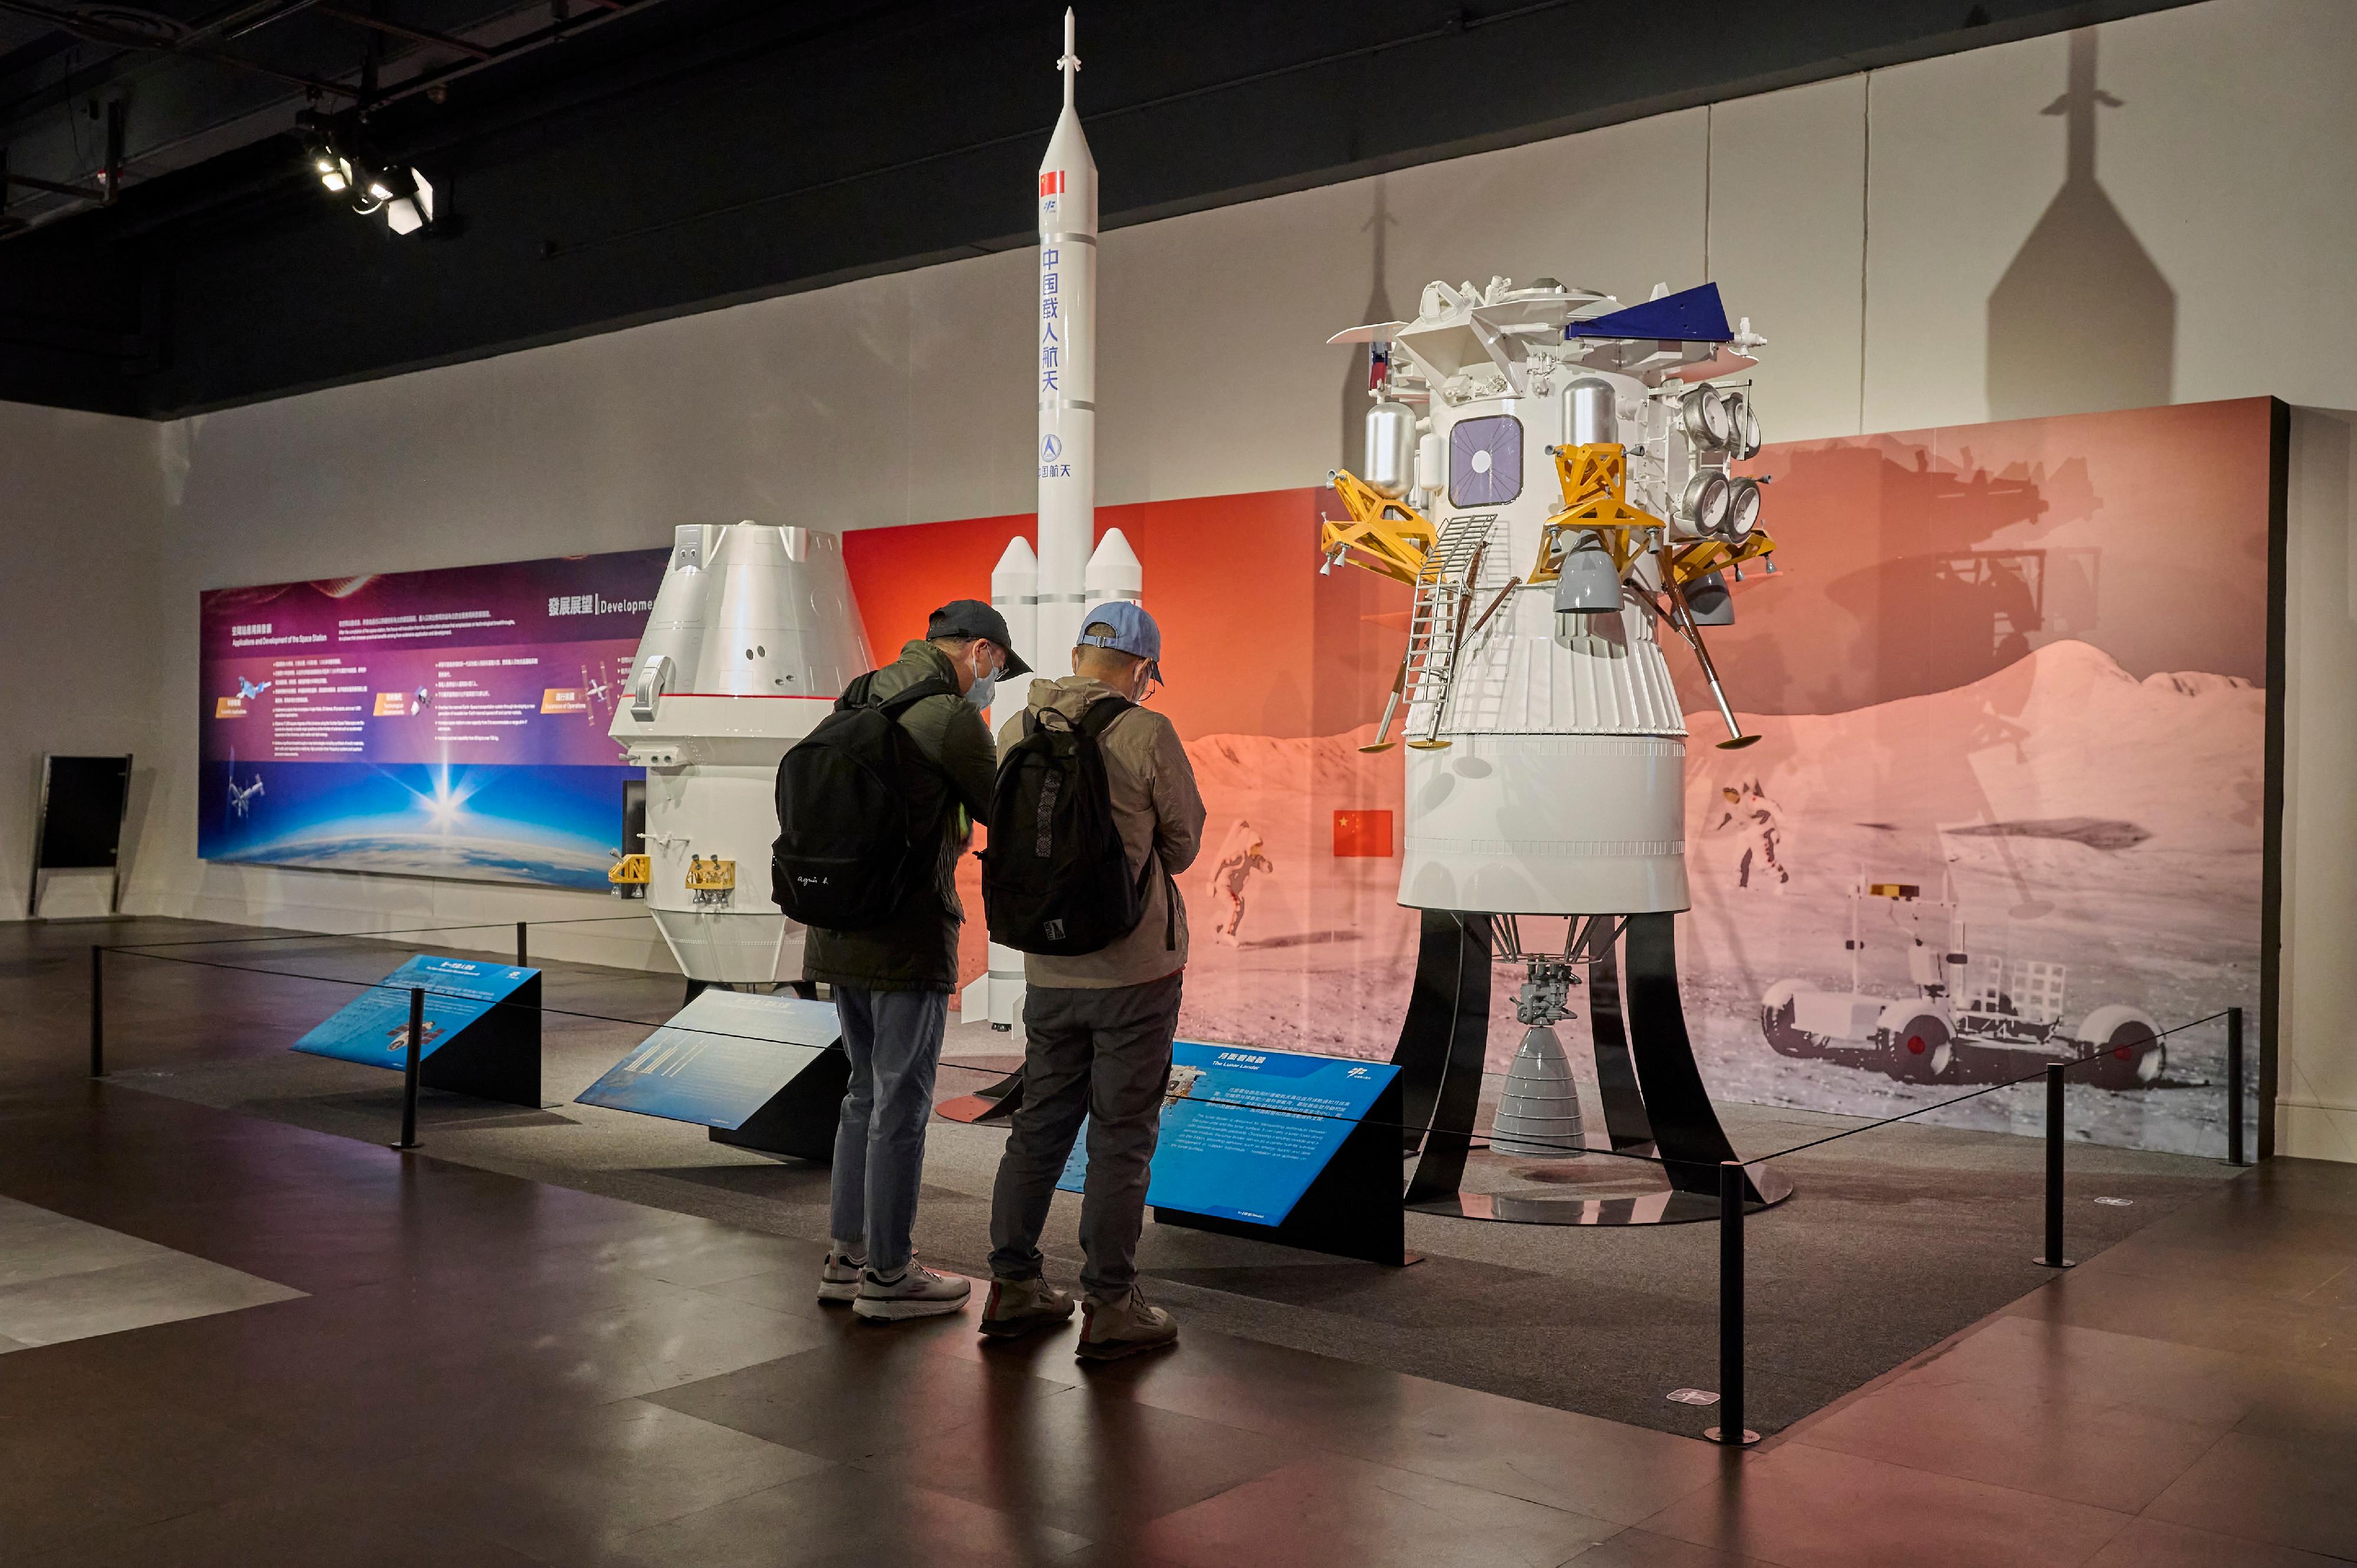 The China Manned Space Exhibition, which is being staged at the Hong Kong Science Museum and the Hong Kong Museum of History, has received overwhelming response from the local public and tourists since its opening on December 1 last year. The exhibition welcomed its 150 000th visitor today (January 21). Photo shows visitors touring the exhibition.